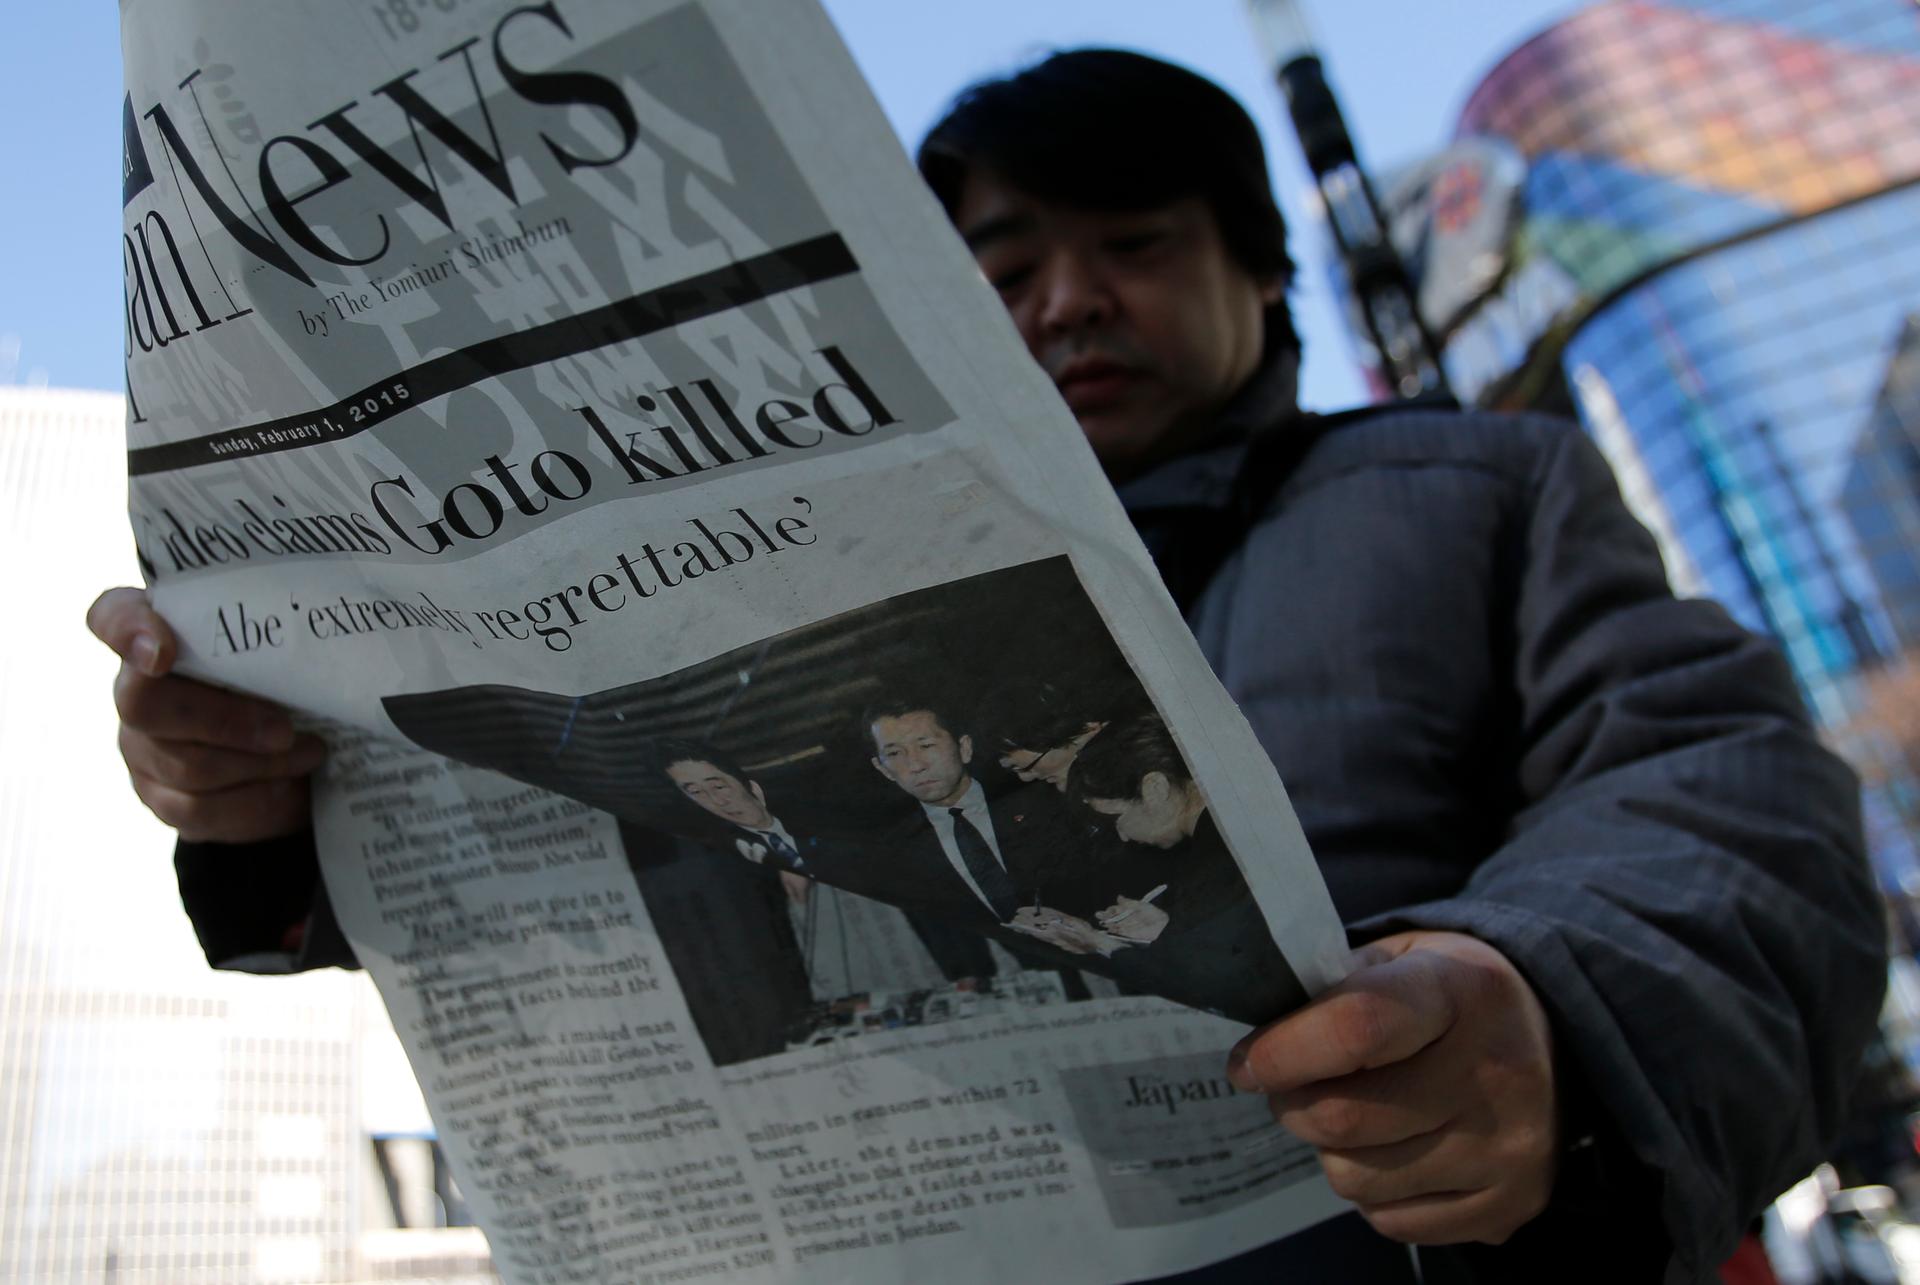 A man in Tokyo's Ginza district reads an extra edition of a newspaper, which reported ISIS' claim to have beheaded Japanese journalist Kenji Goto on February 1, 2015.